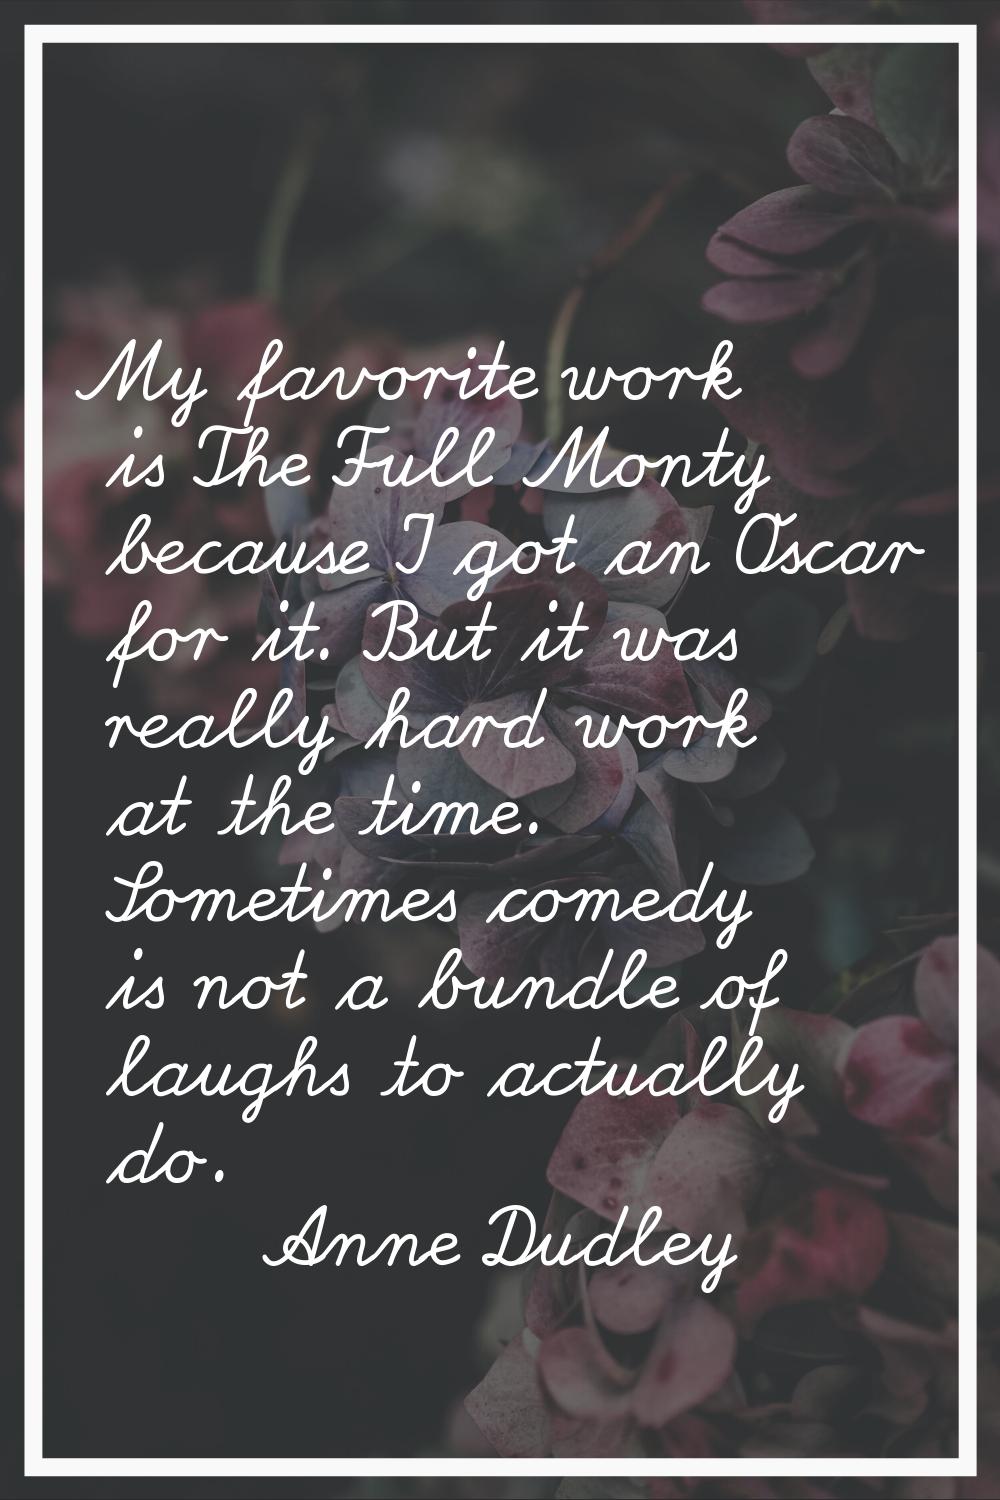 My favorite work is The Full Monty because I got an Oscar for it. But it was really hard work at th